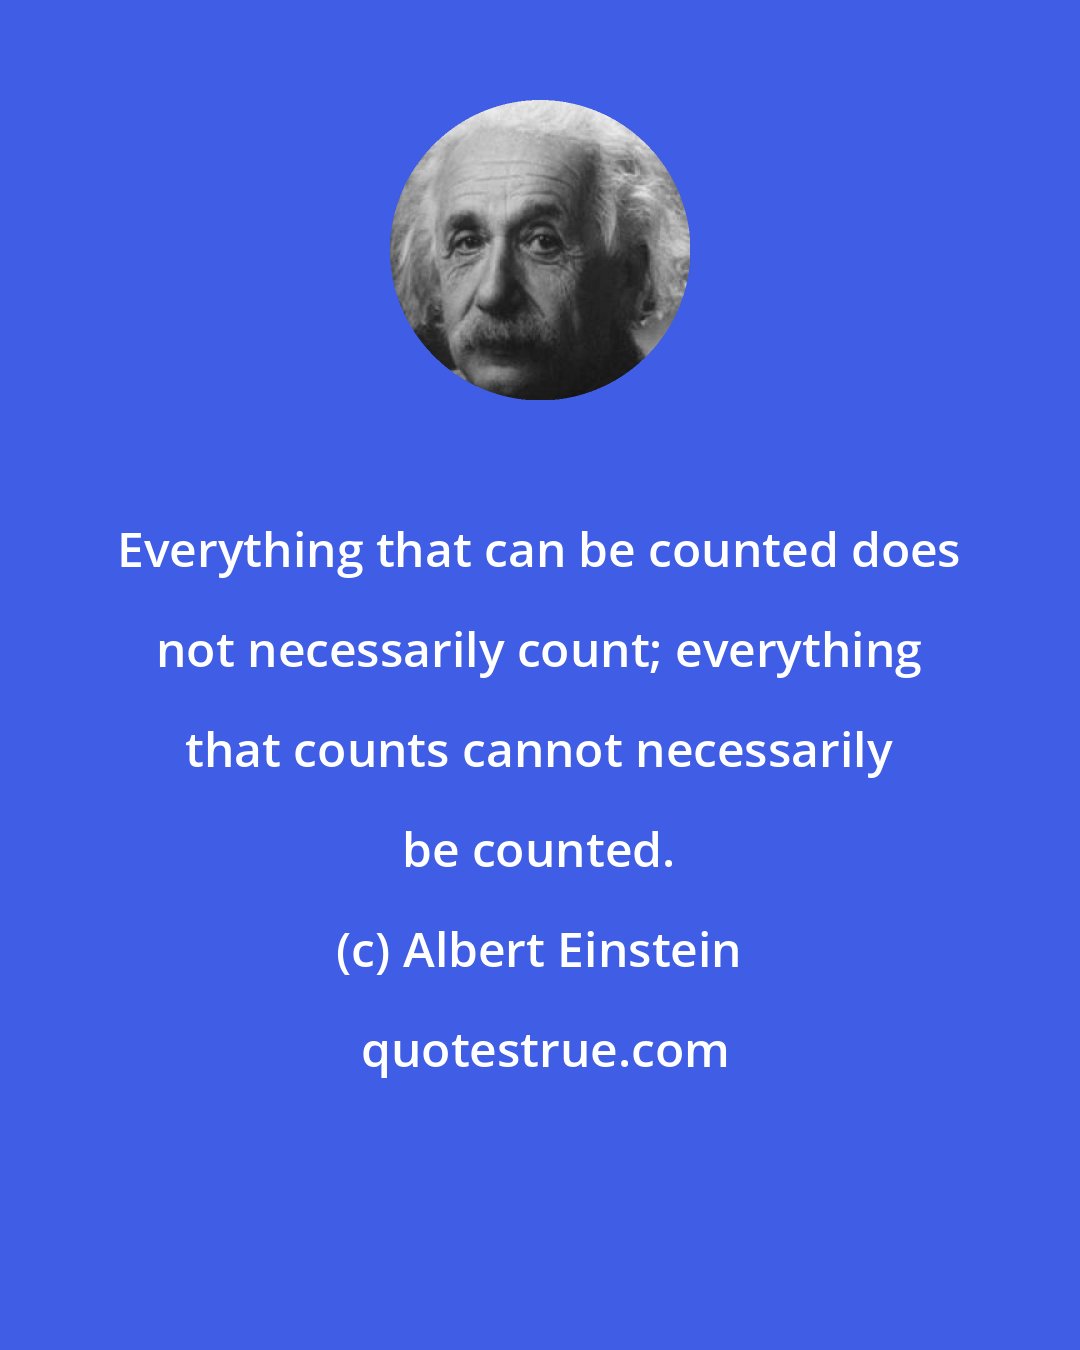 Albert Einstein: Everything that can be counted does not necessarily count; everything that counts cannot necessarily be counted.